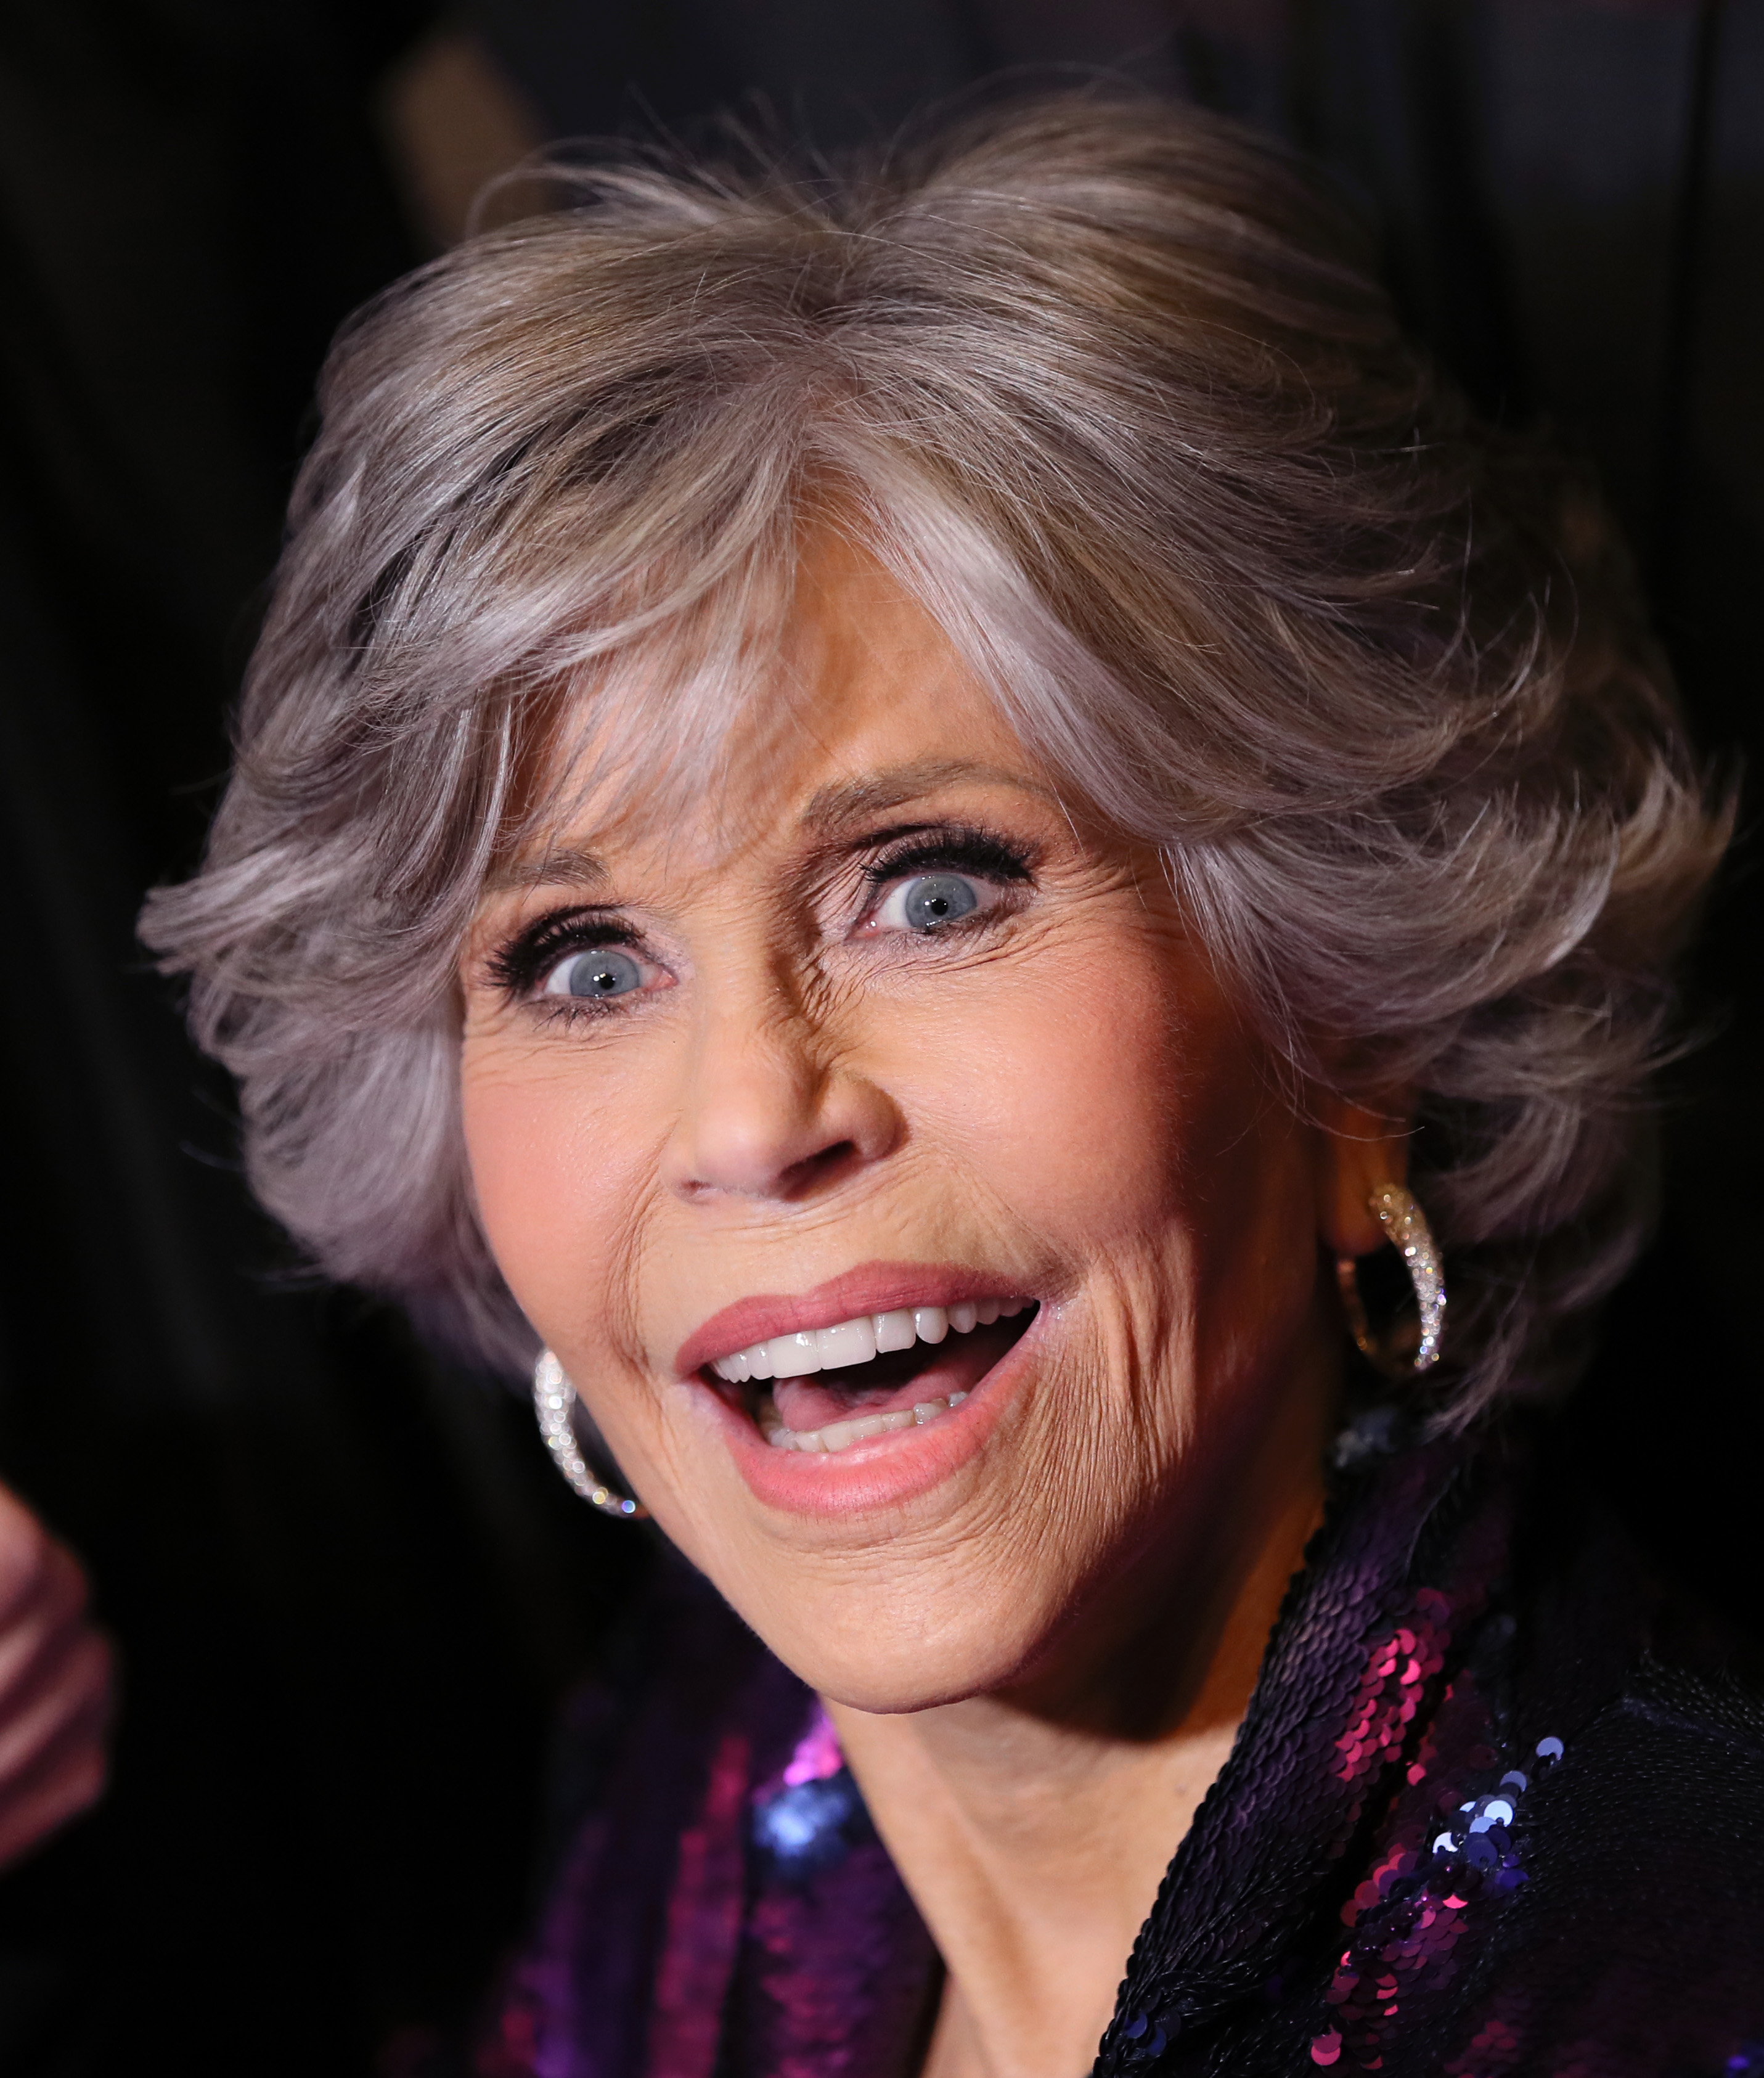 Jane Fonda attends the 2022 Lo Máximo Awards and Fundraising Gala at JW Marriott in Los Angeles, California | Source: Getty Images